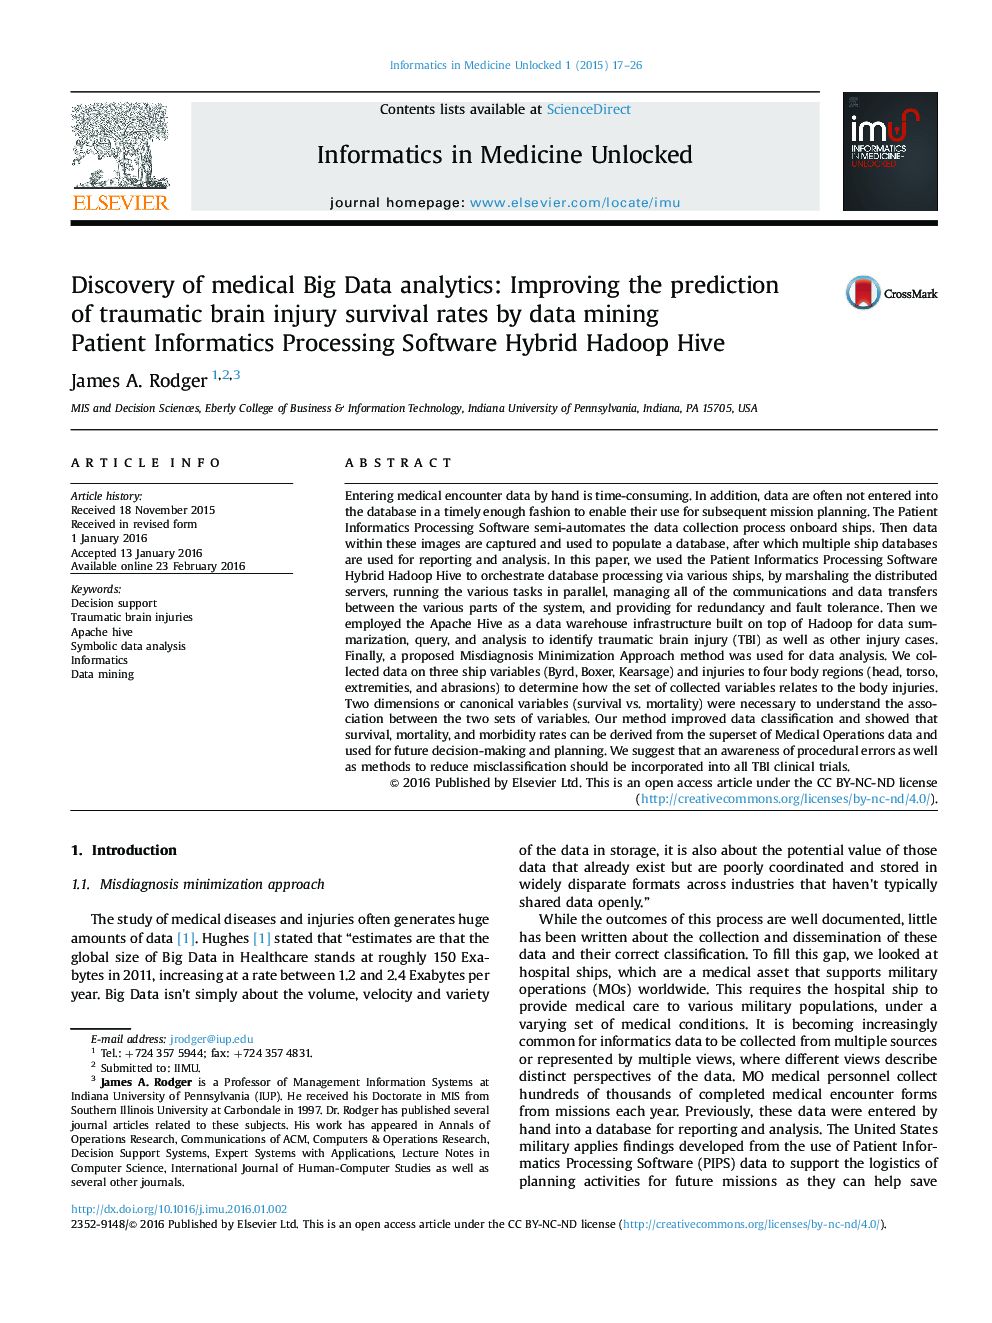 Discovery of medical Big Data analytics: Improving the prediction of traumatic brain injury survival rates by data mining Patient Informatics Processing Software Hybrid Hadoop Hive